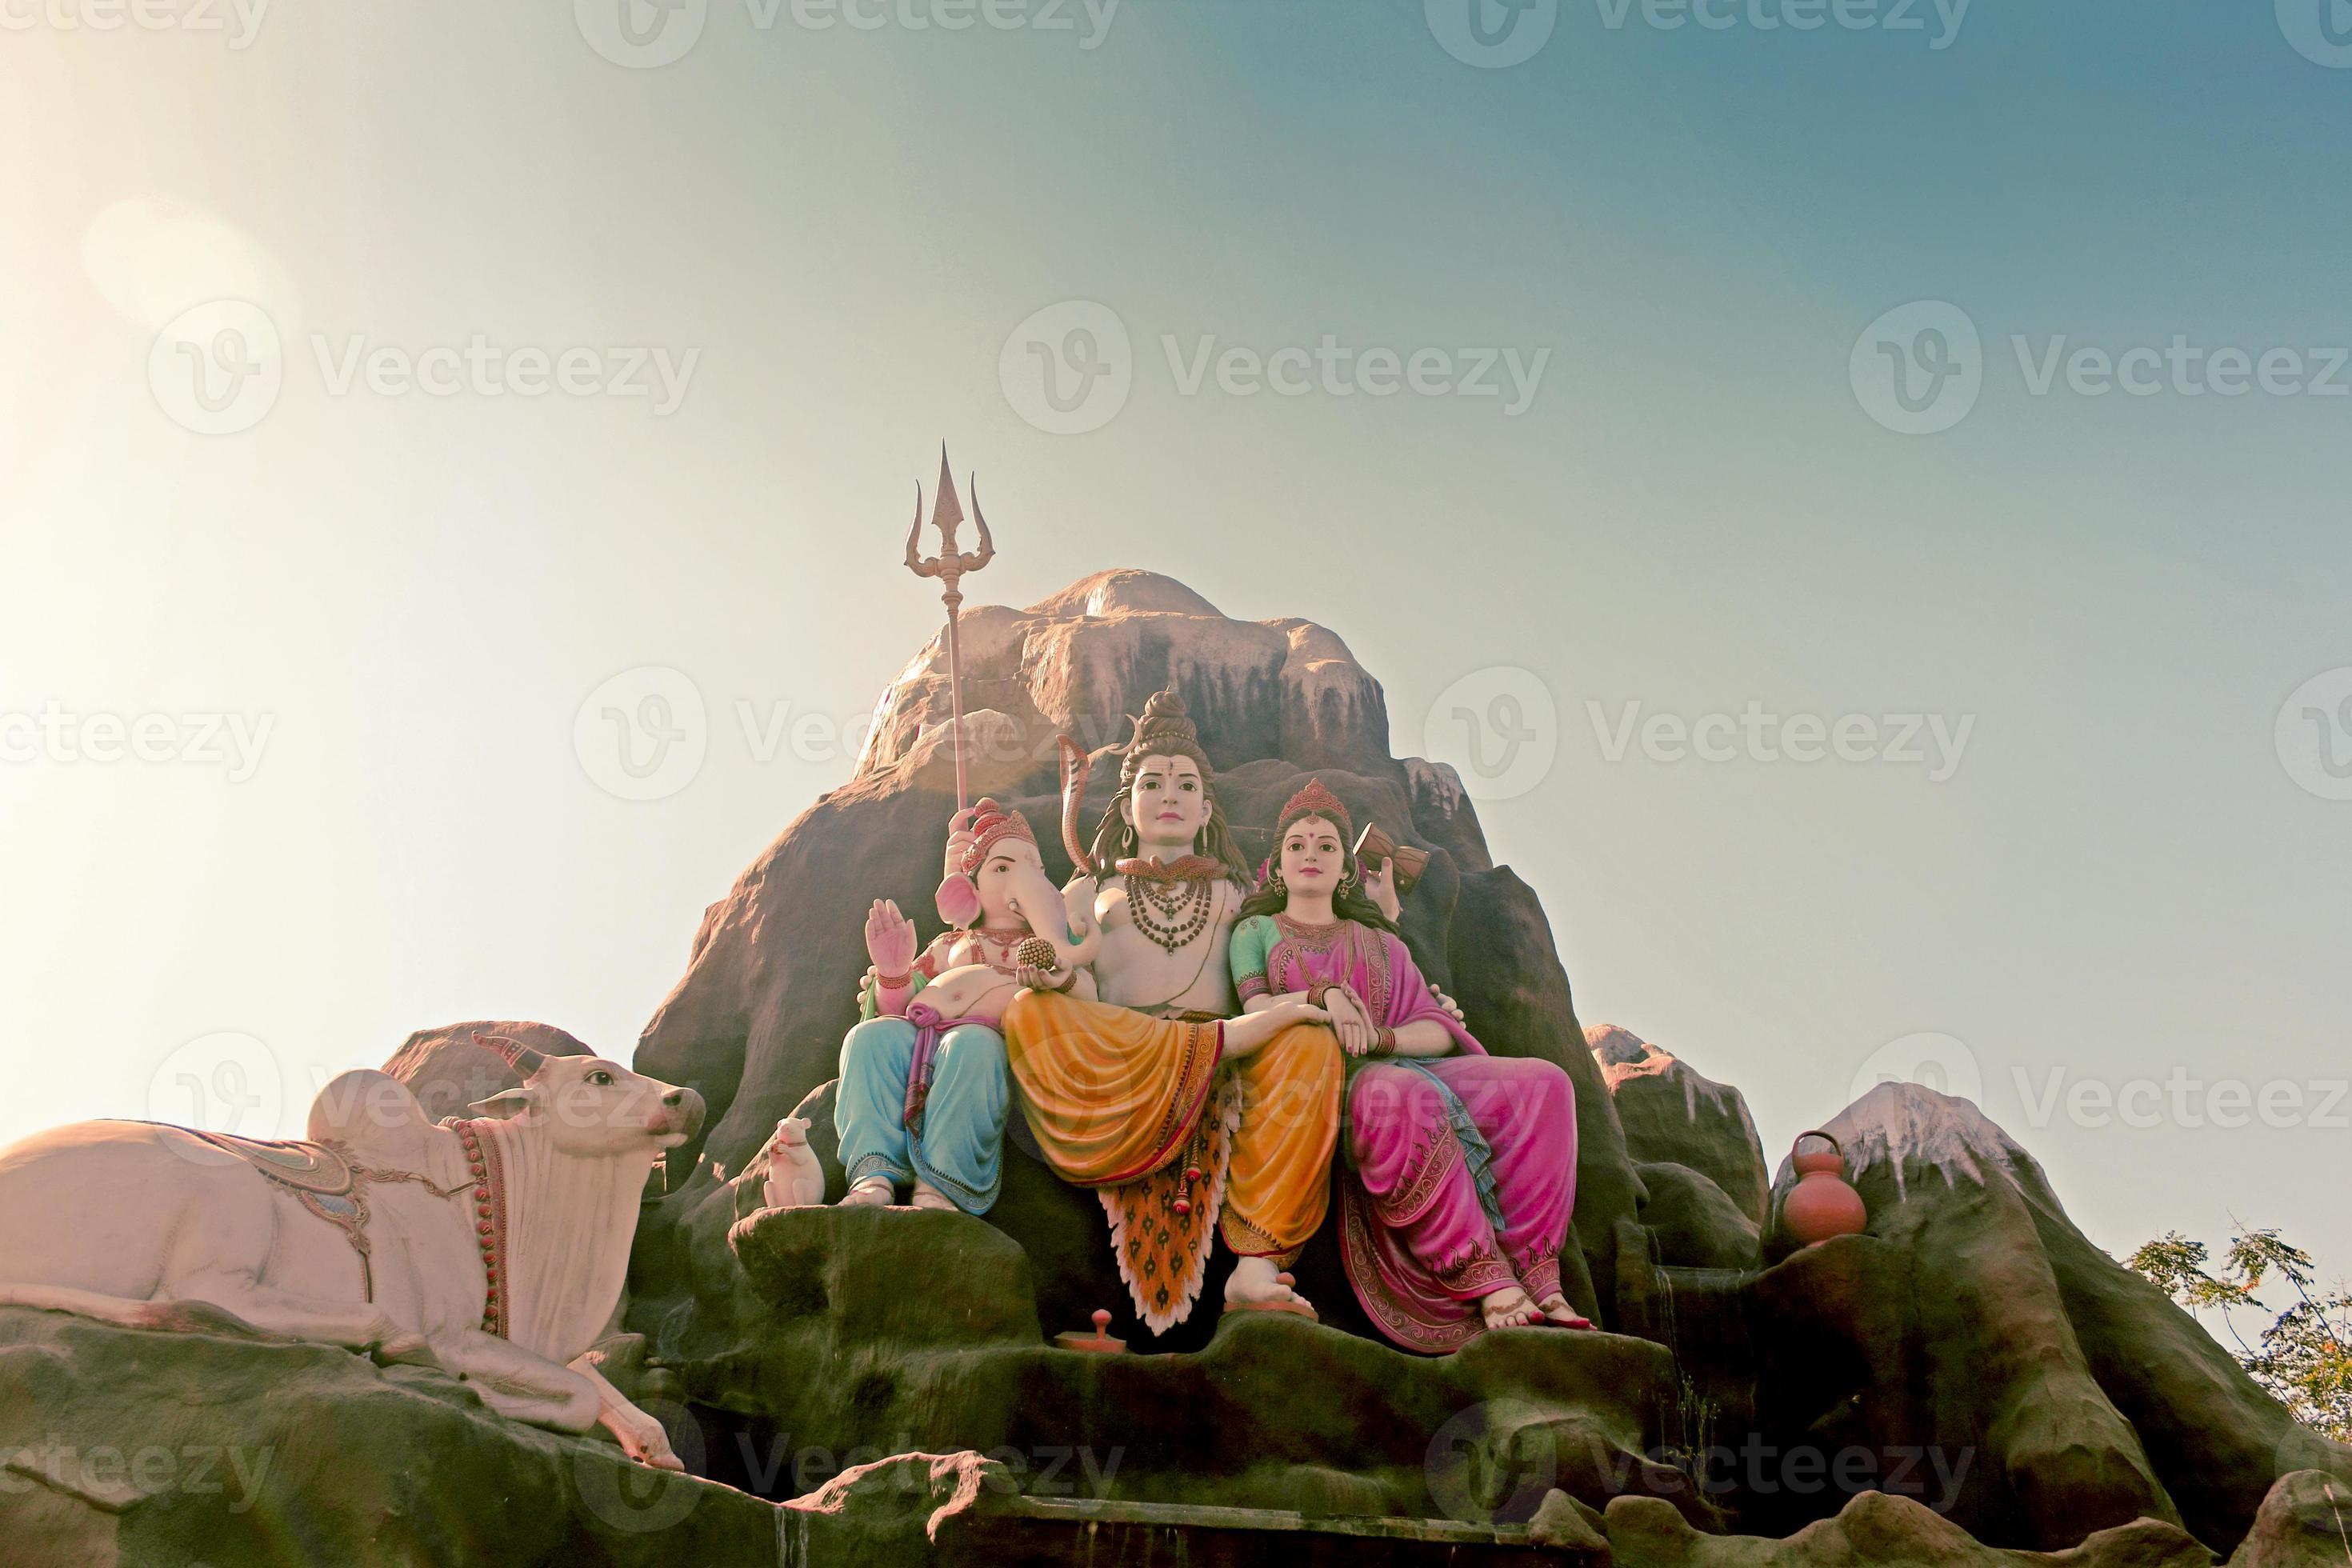 Statue of Lord Shiva-Parvati with Ganesha 1182289 Stock Photo at Vecteezy